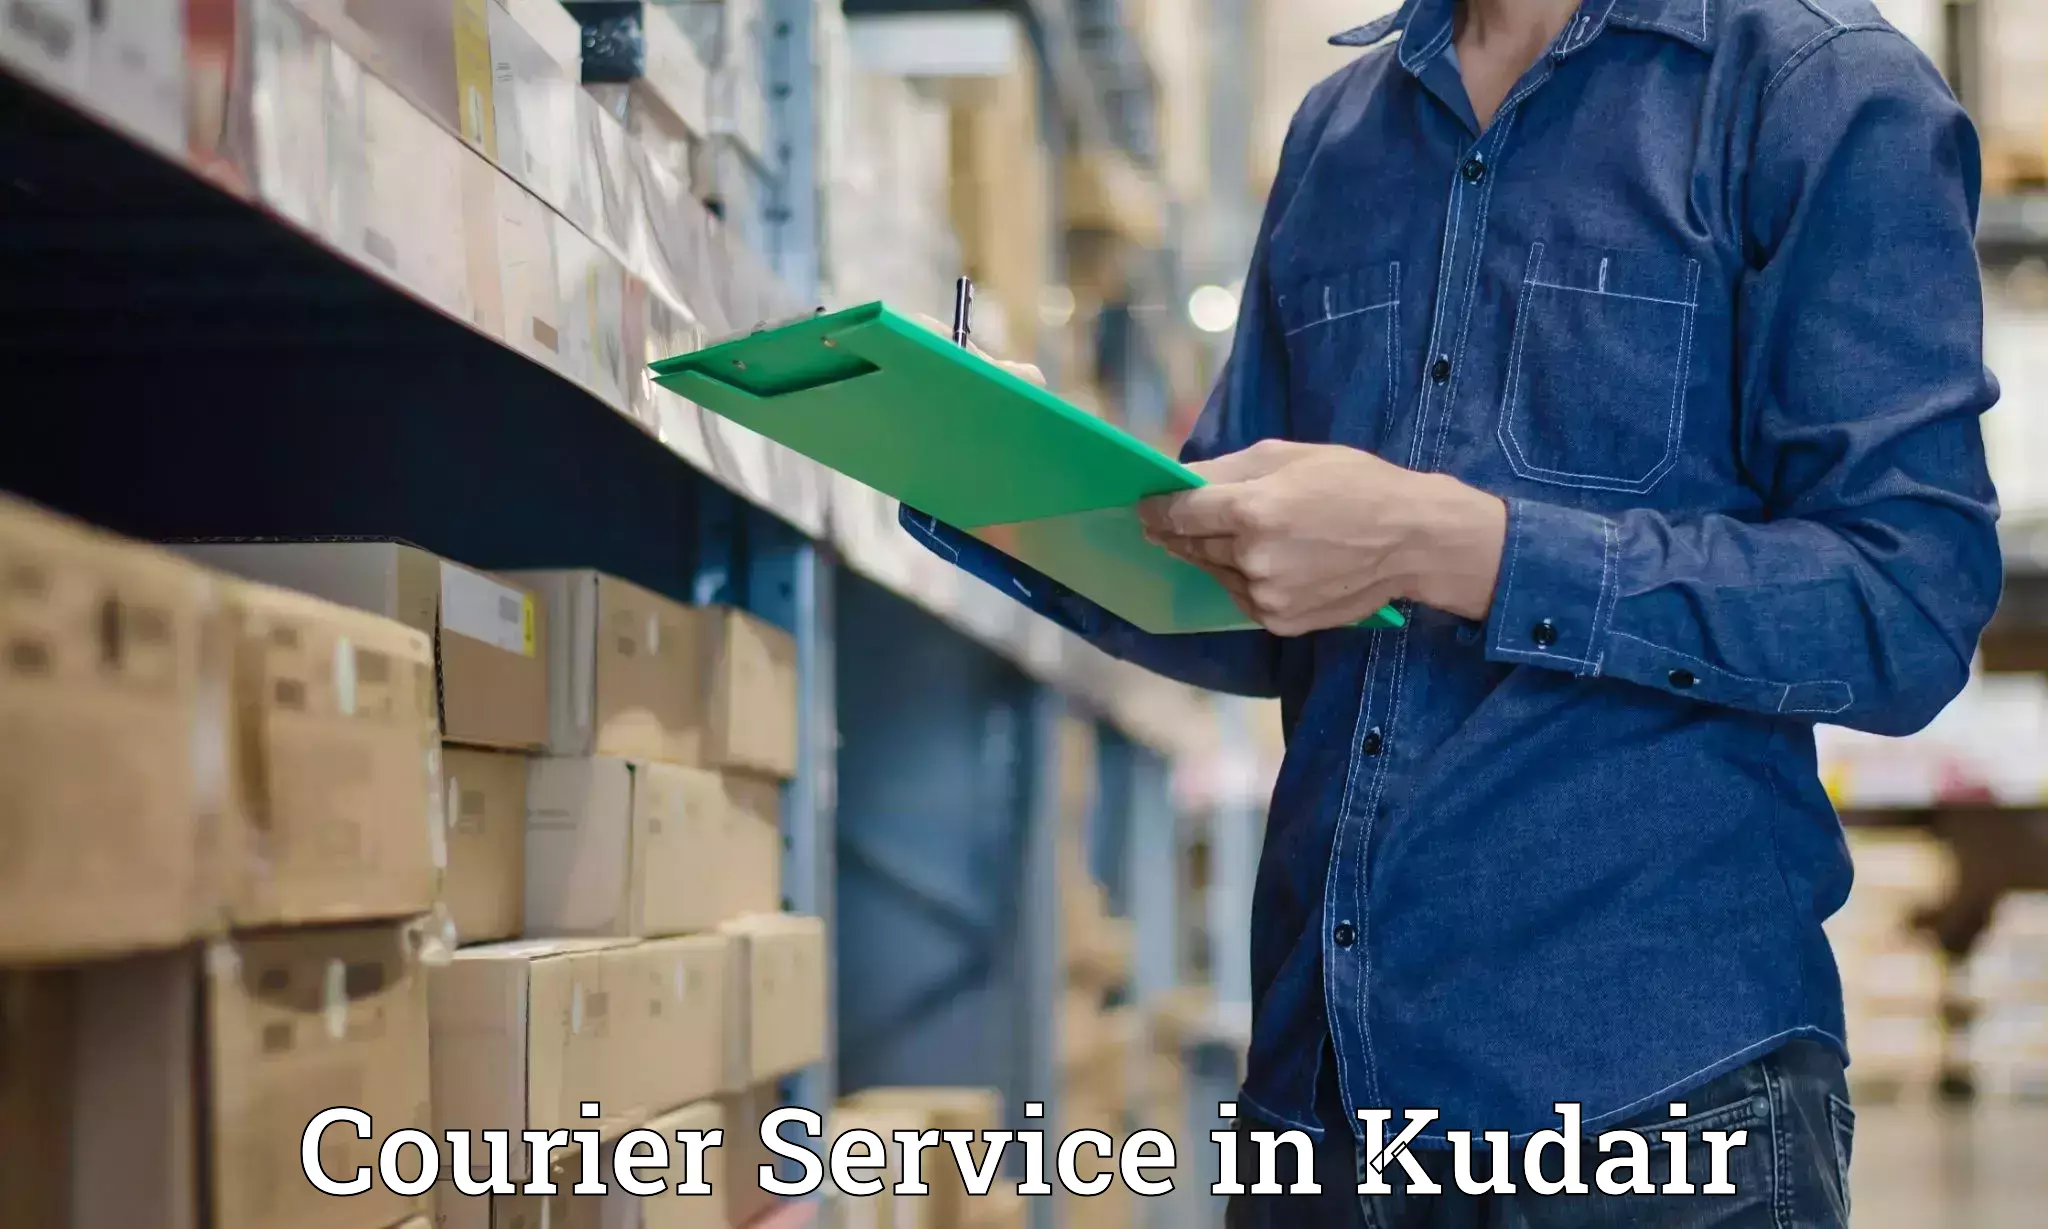 Automated shipping processes in Kudair